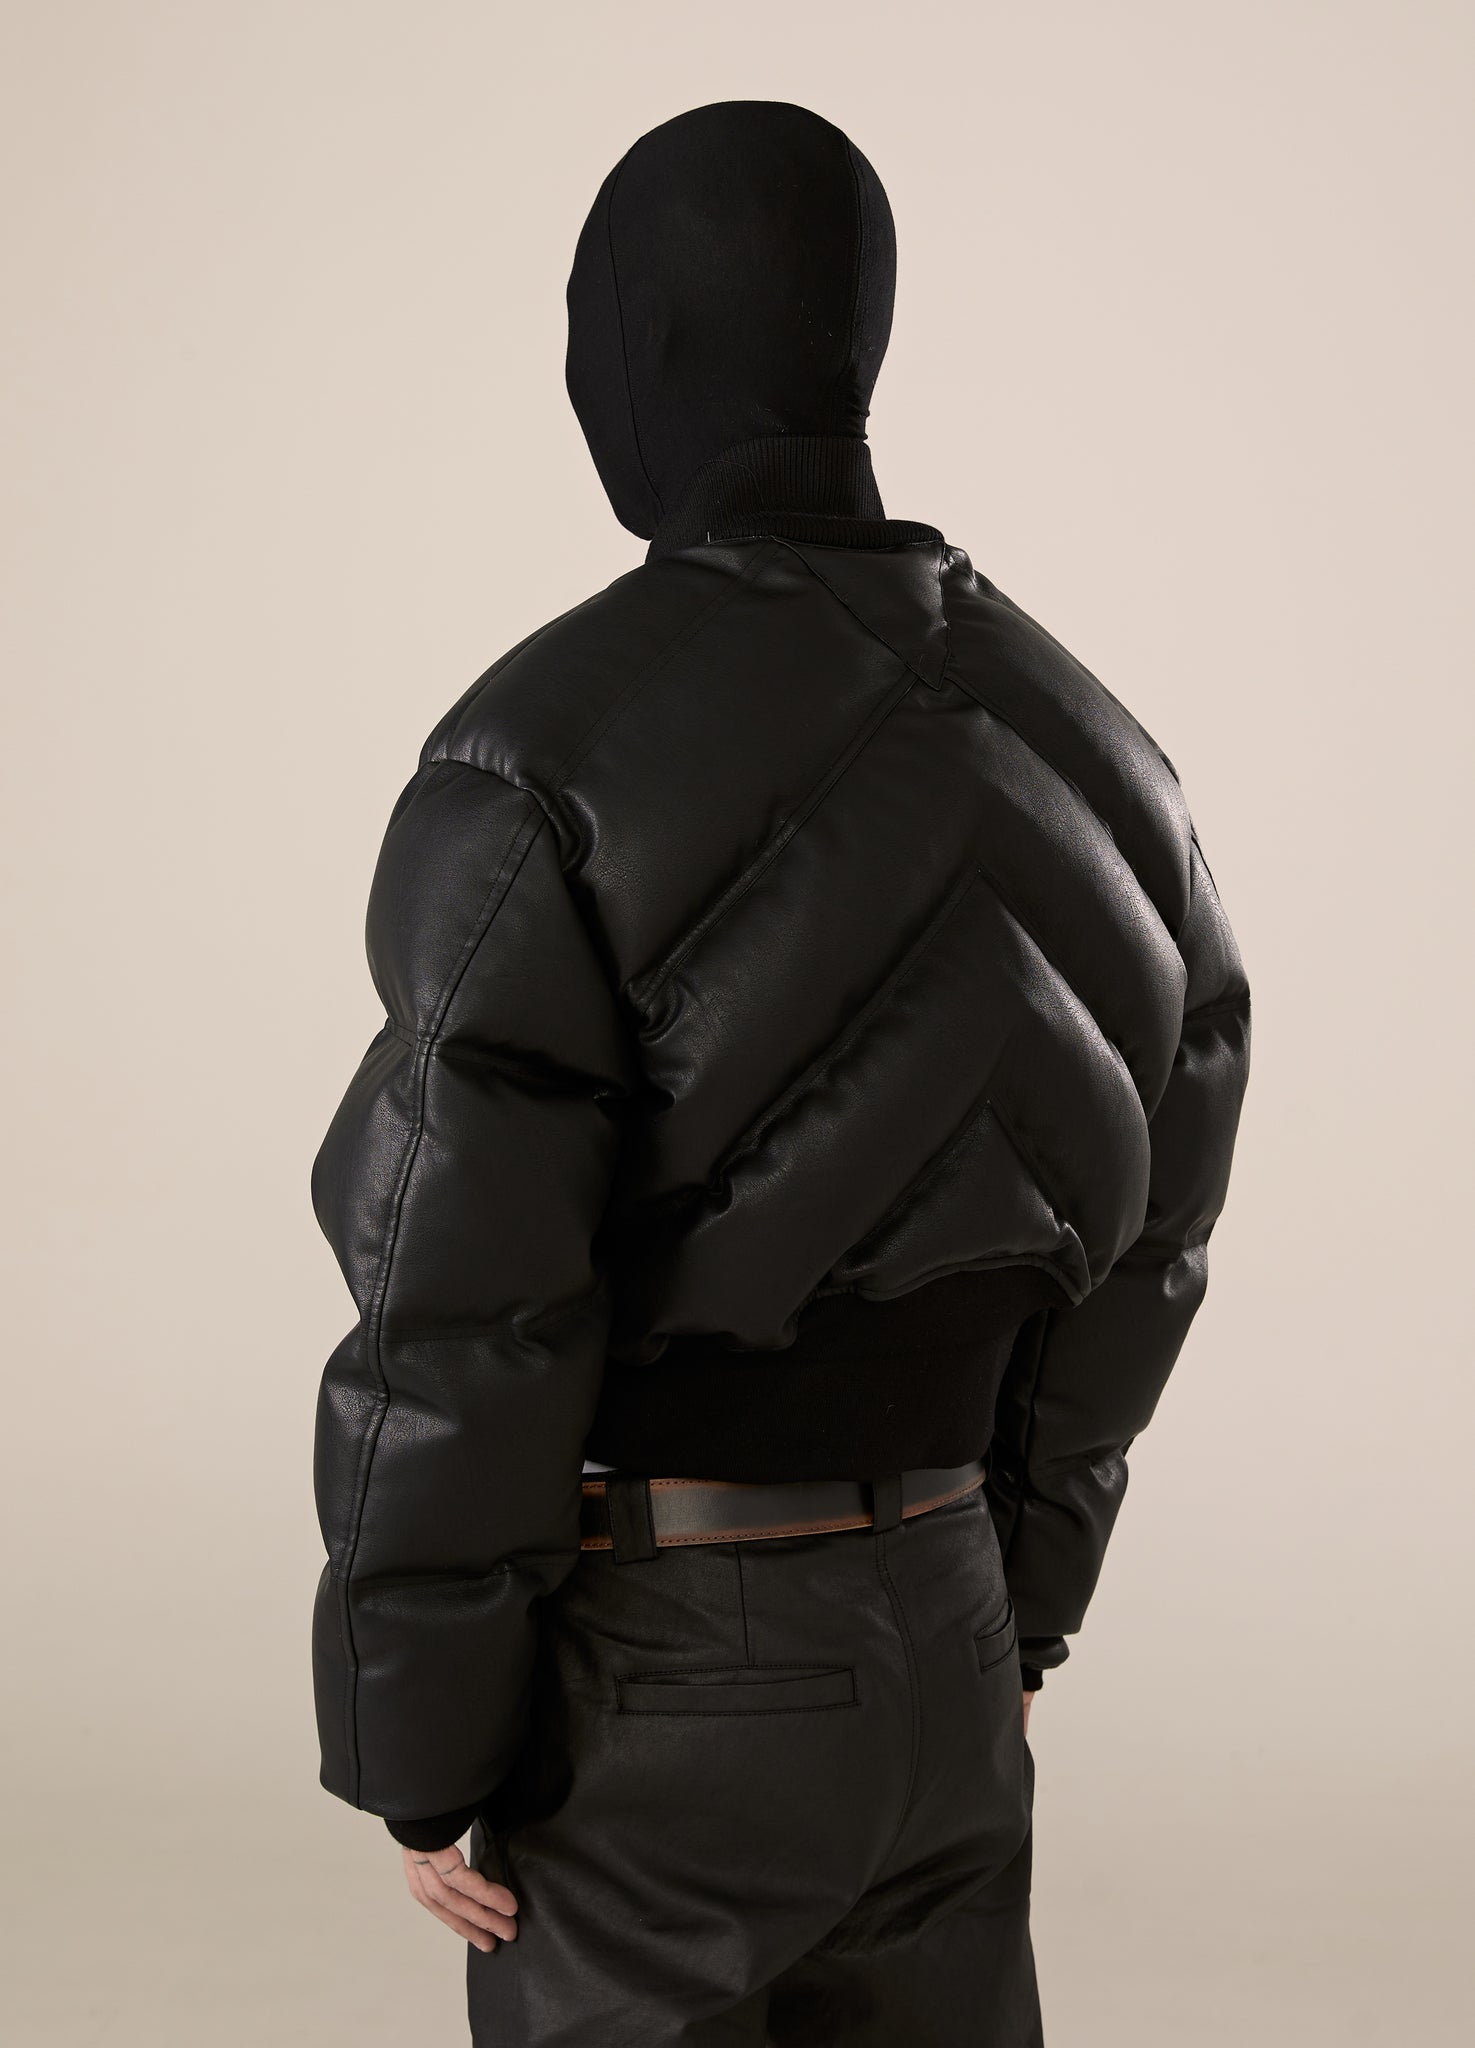 DP PARADIS 23AW Limited Edition Geometric Down Jacket